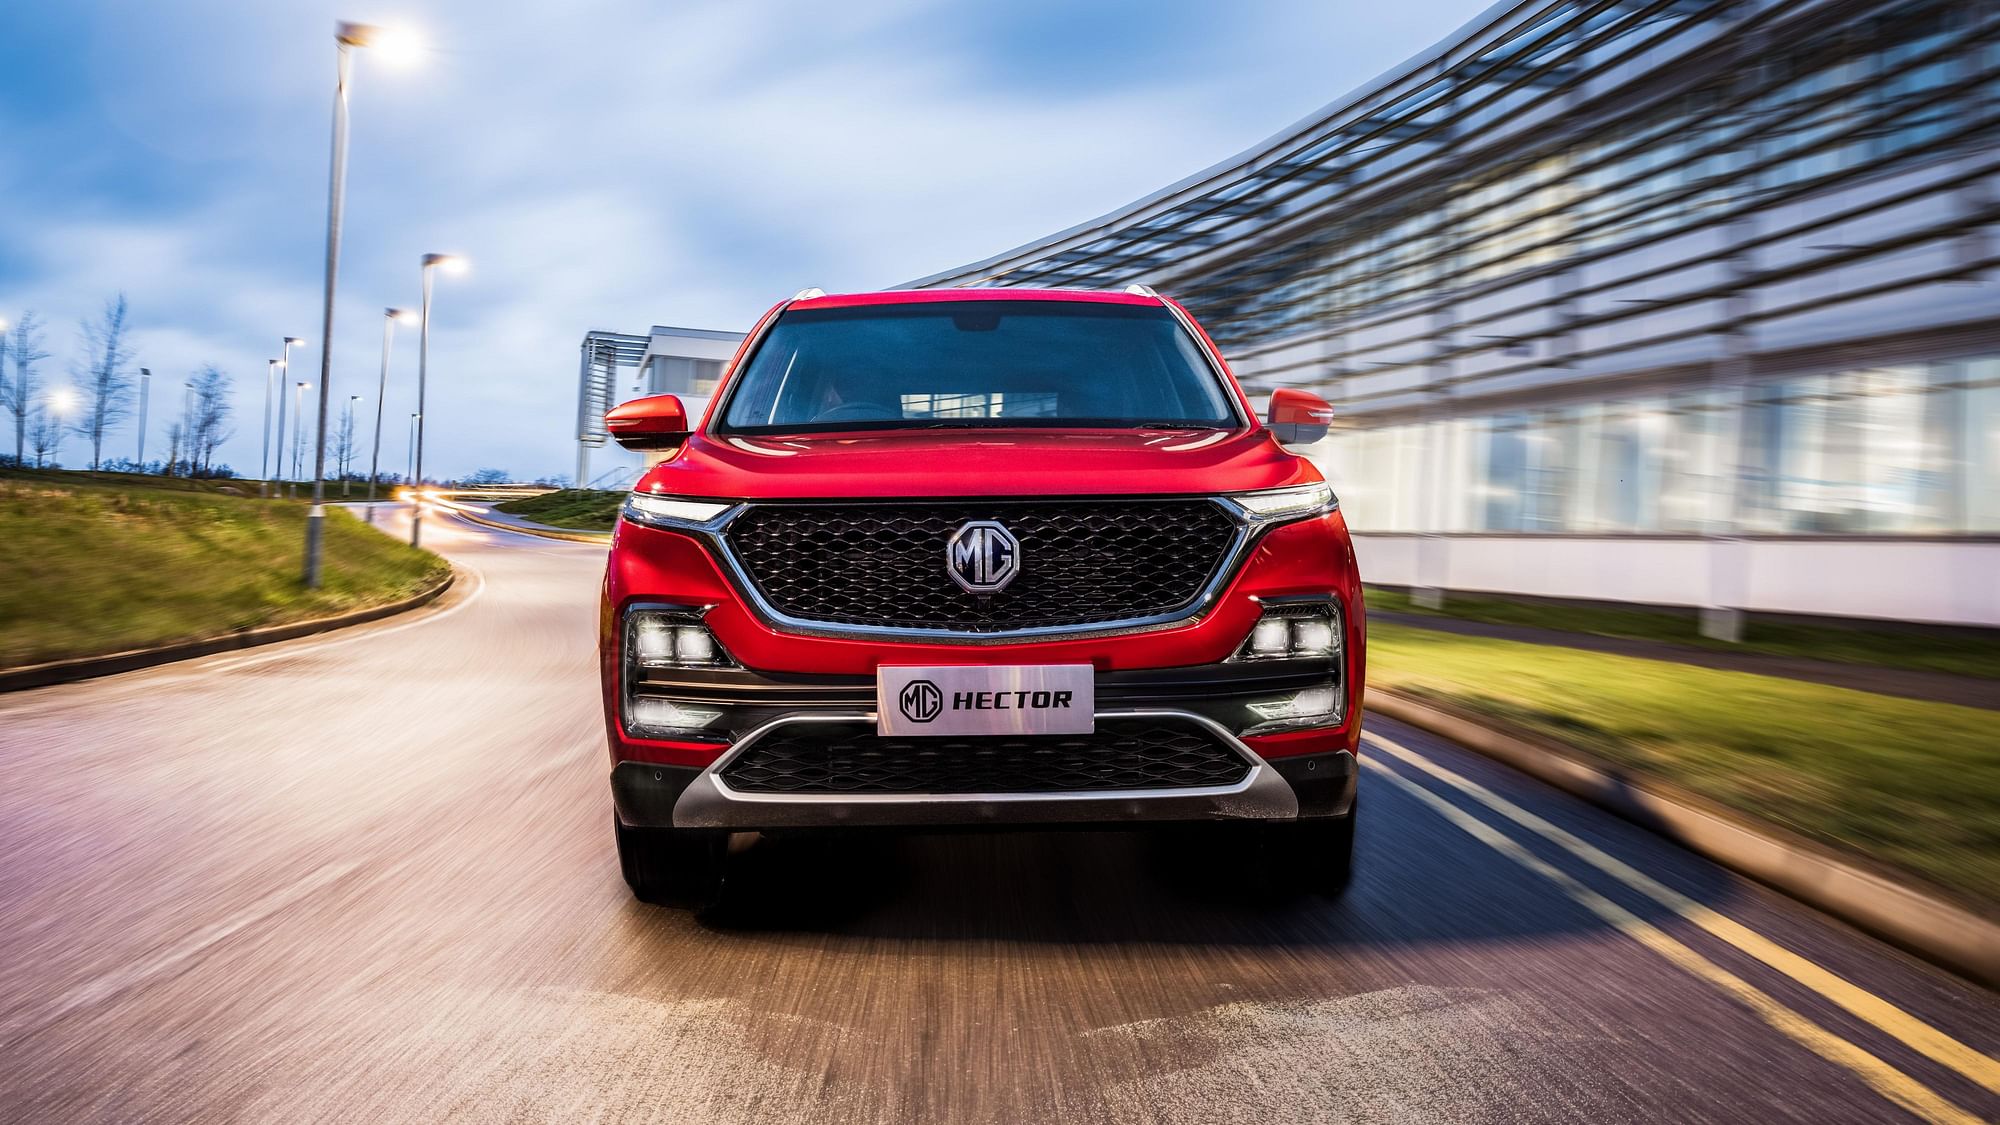 The upcoming MG Hector is equipped with an iSmart Internet-Enabled infotainment system that can perform a host of functions.